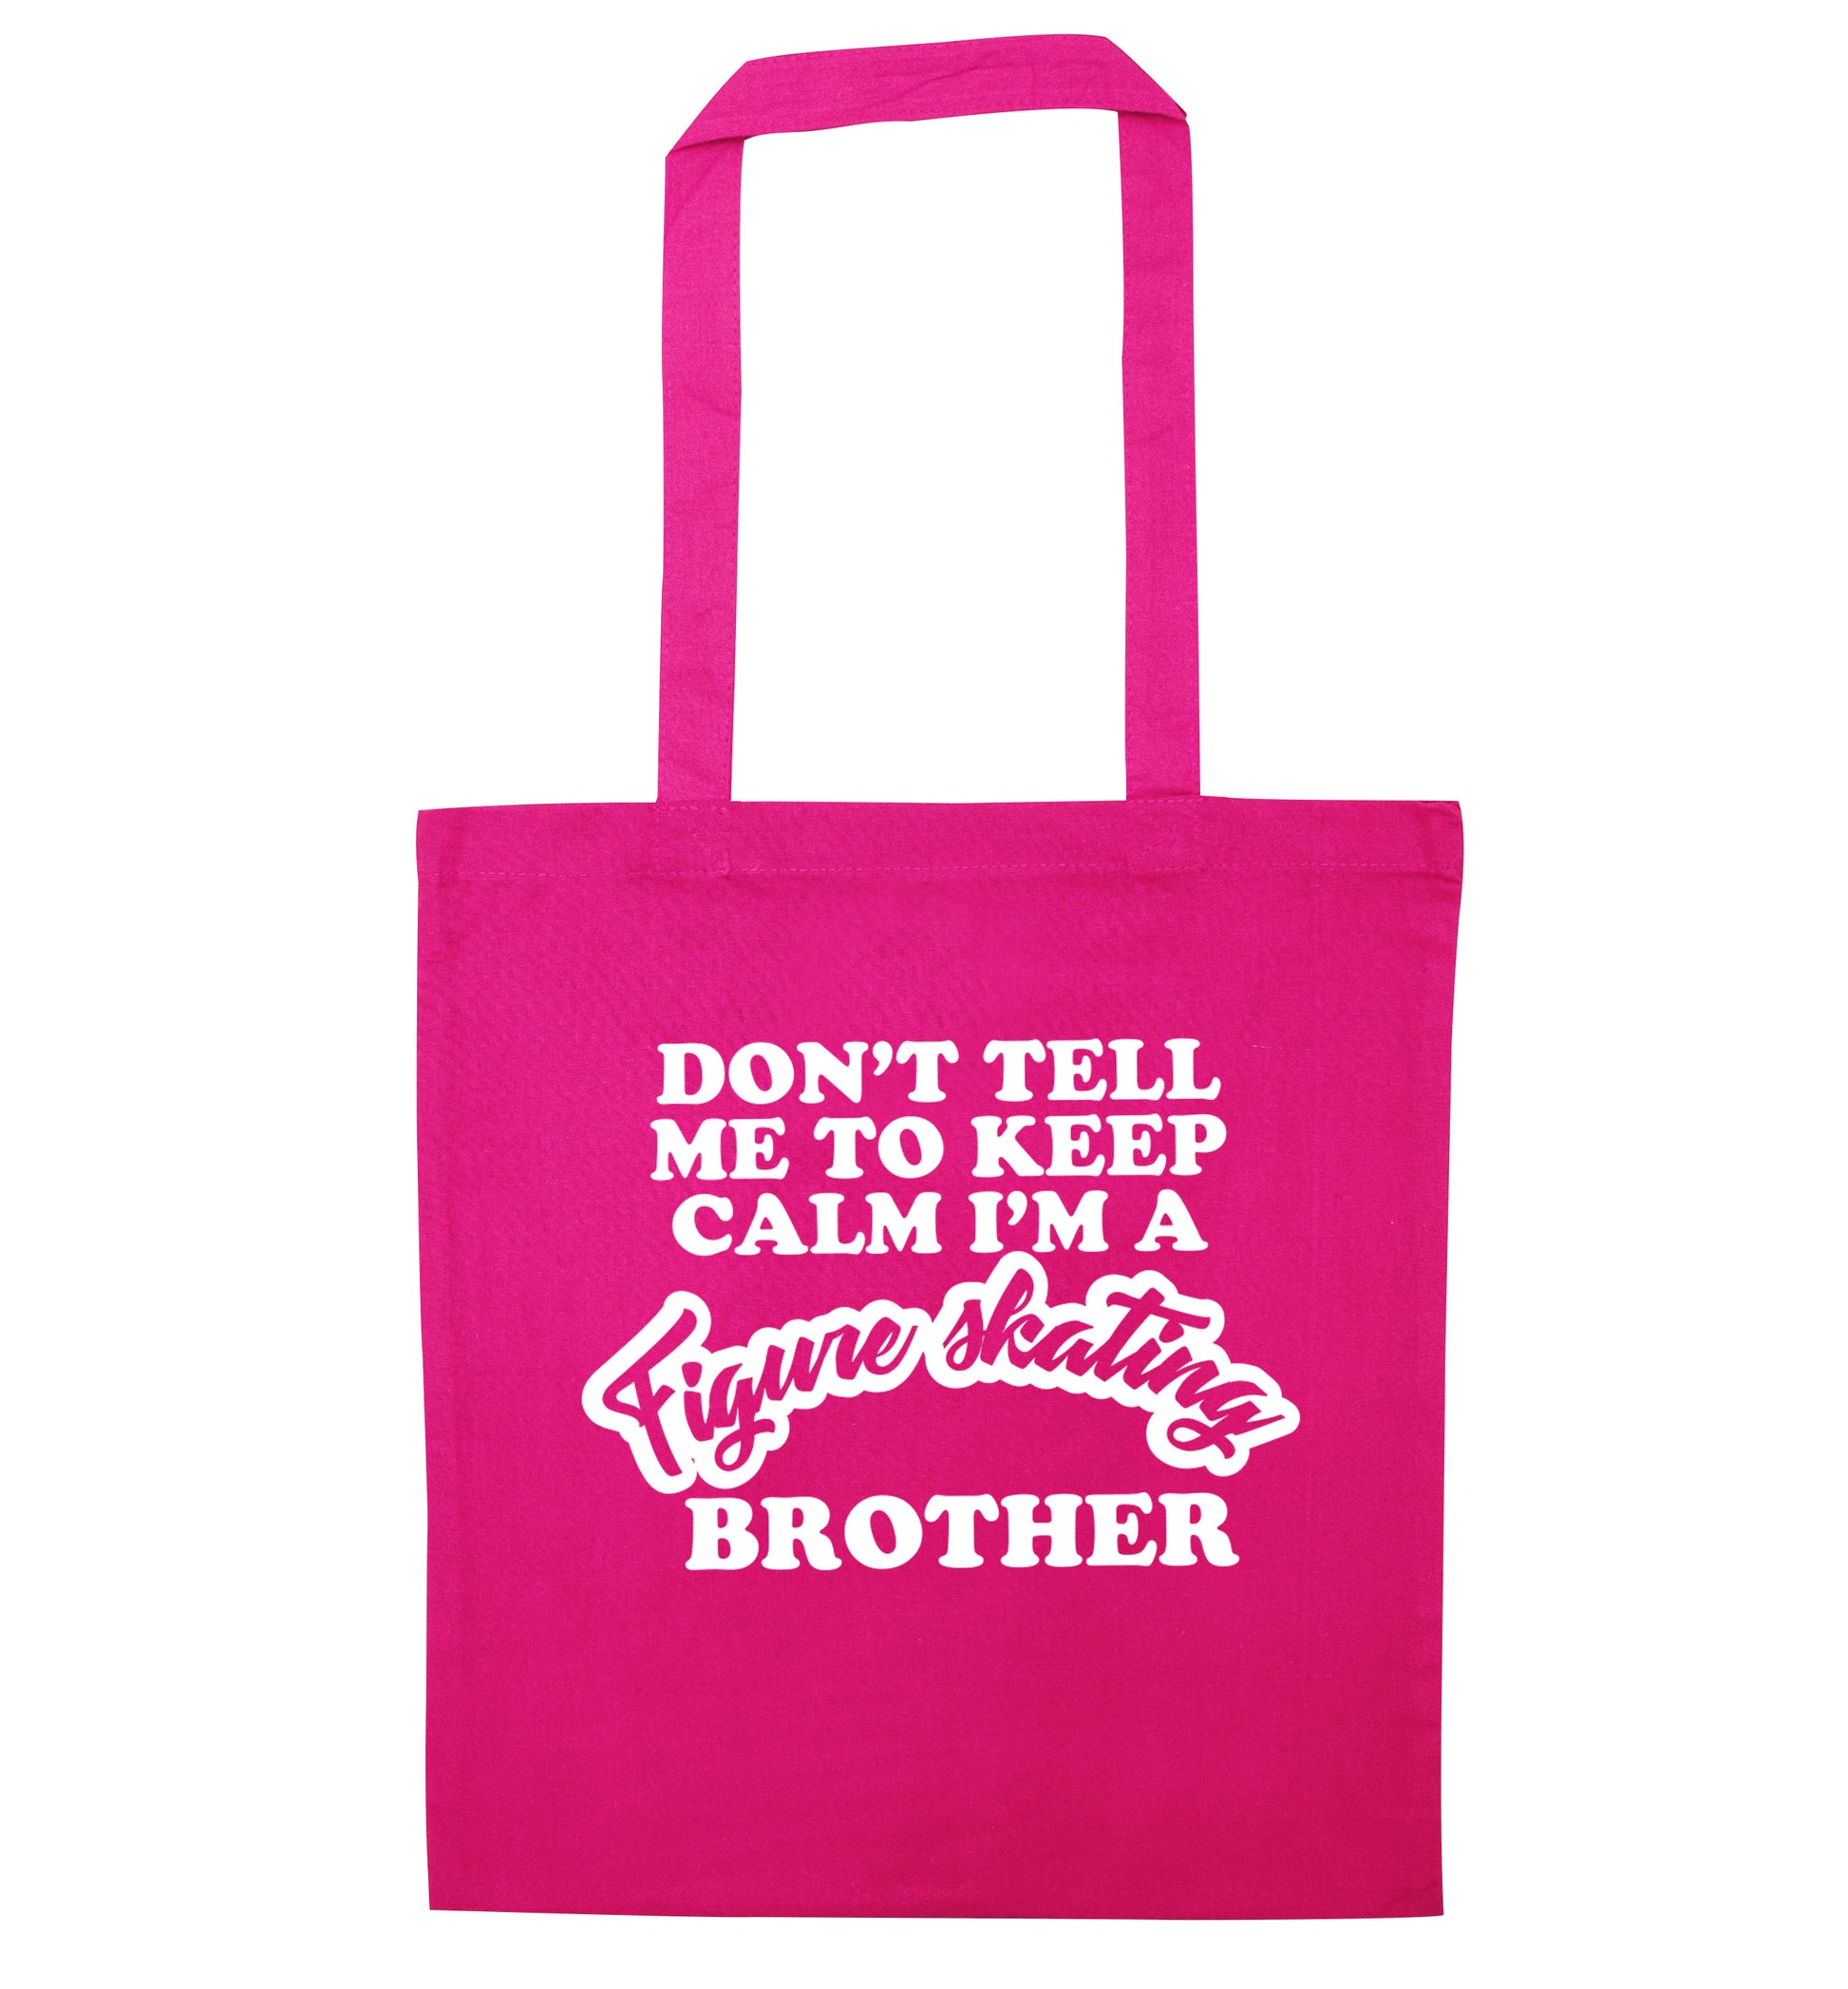 Don't tell me to keep calm I'm a figure skating brother pink tote bag